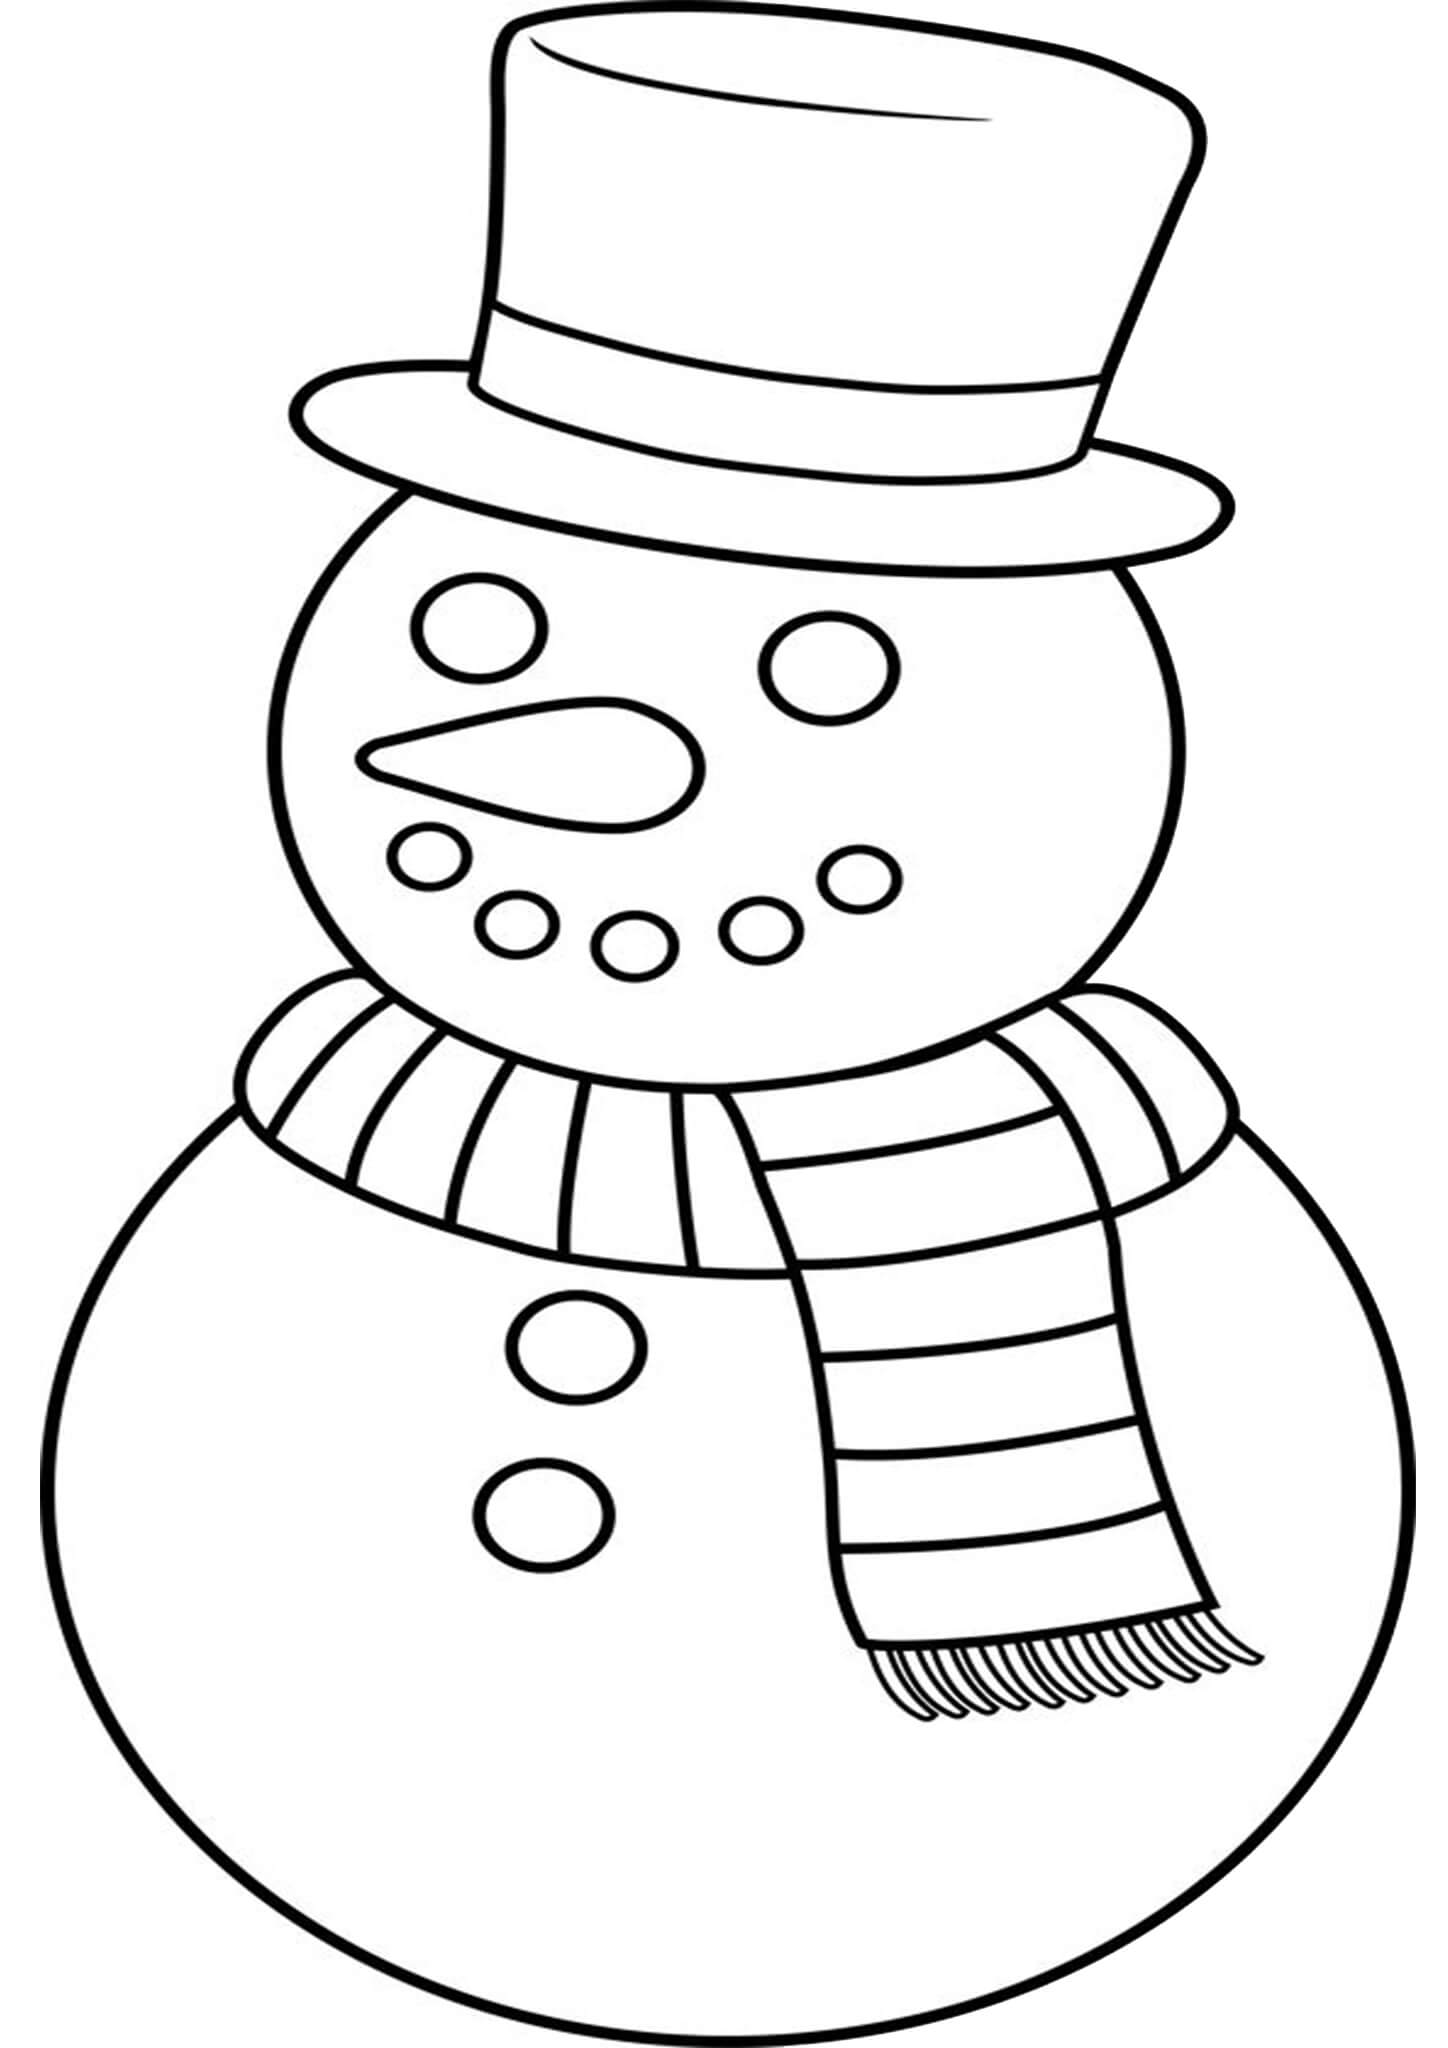 free-printable-snowman-coloring-pages-for-kids-snowman-coloring-pages